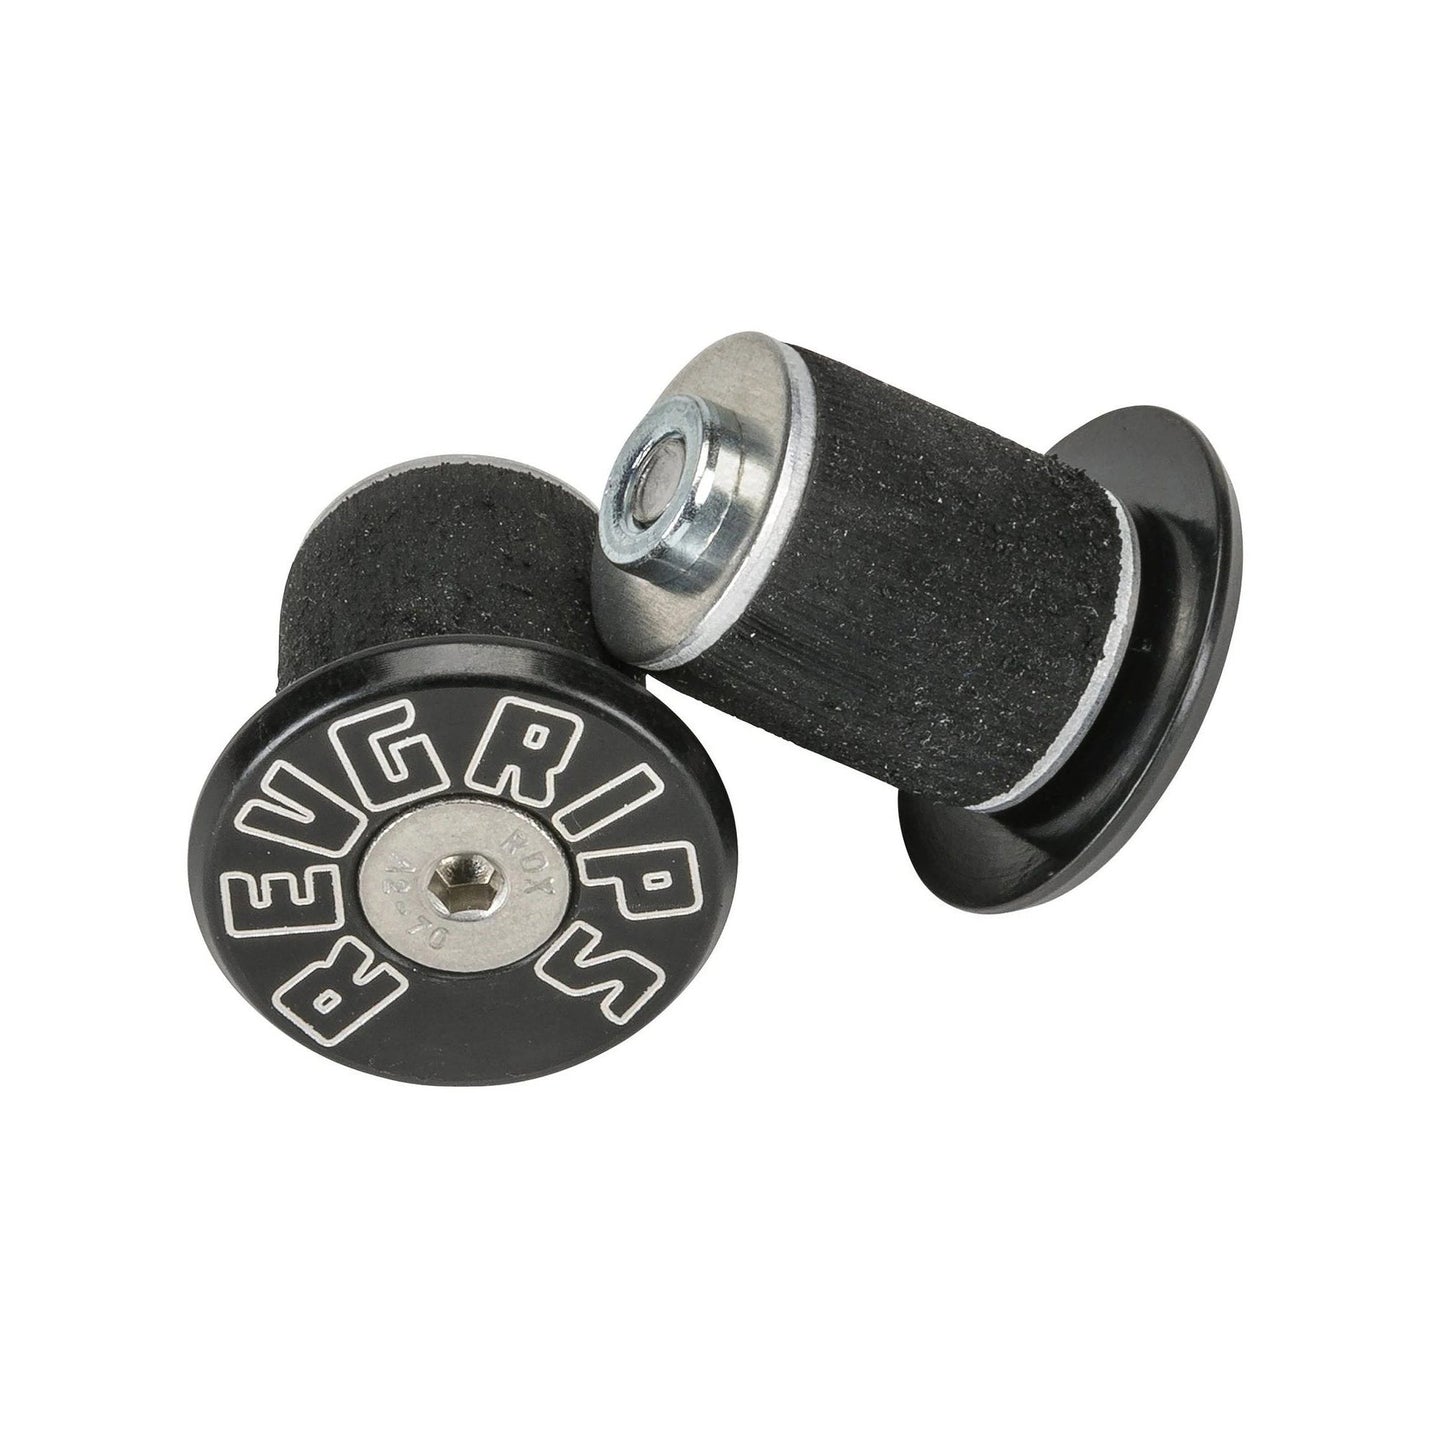 RevGrips Bar End Assembly - End Plugs - Black